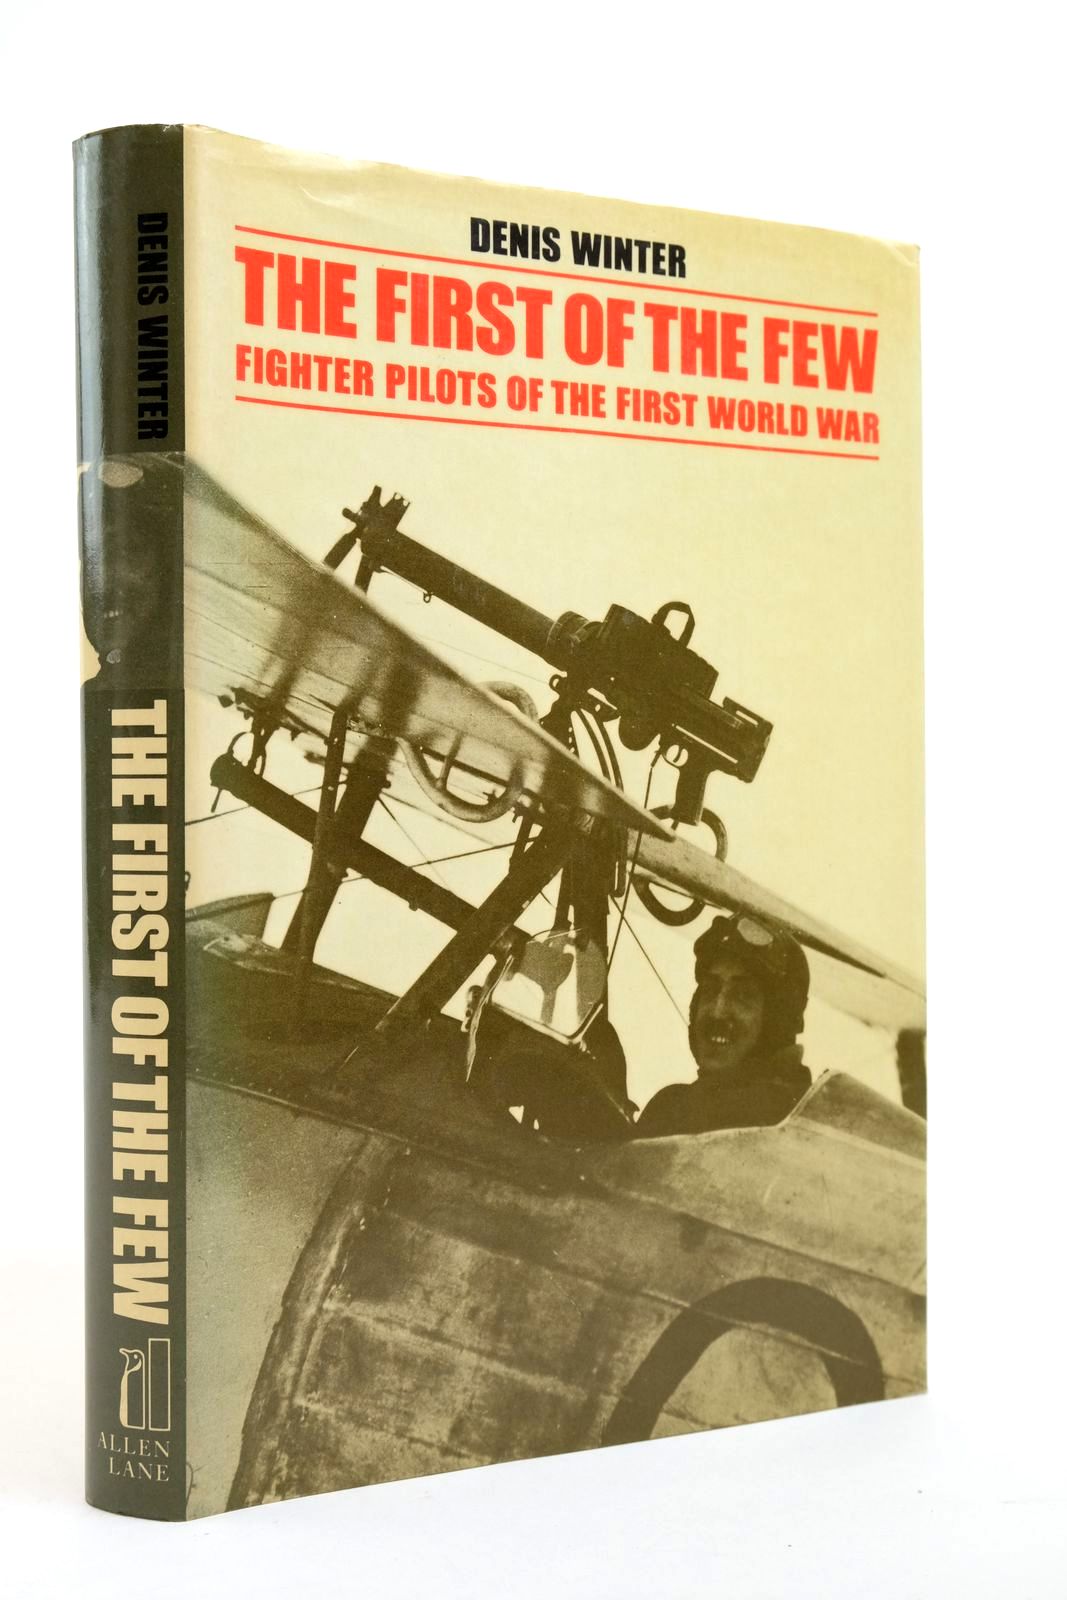 Photo of THE FIRST OF THE FEW: FIGHTER PILOTS OF THE FIRST WORLD WAR written by Winter, Denis published by Allen Lane (STOCK CODE: 2139866)  for sale by Stella & Rose's Books